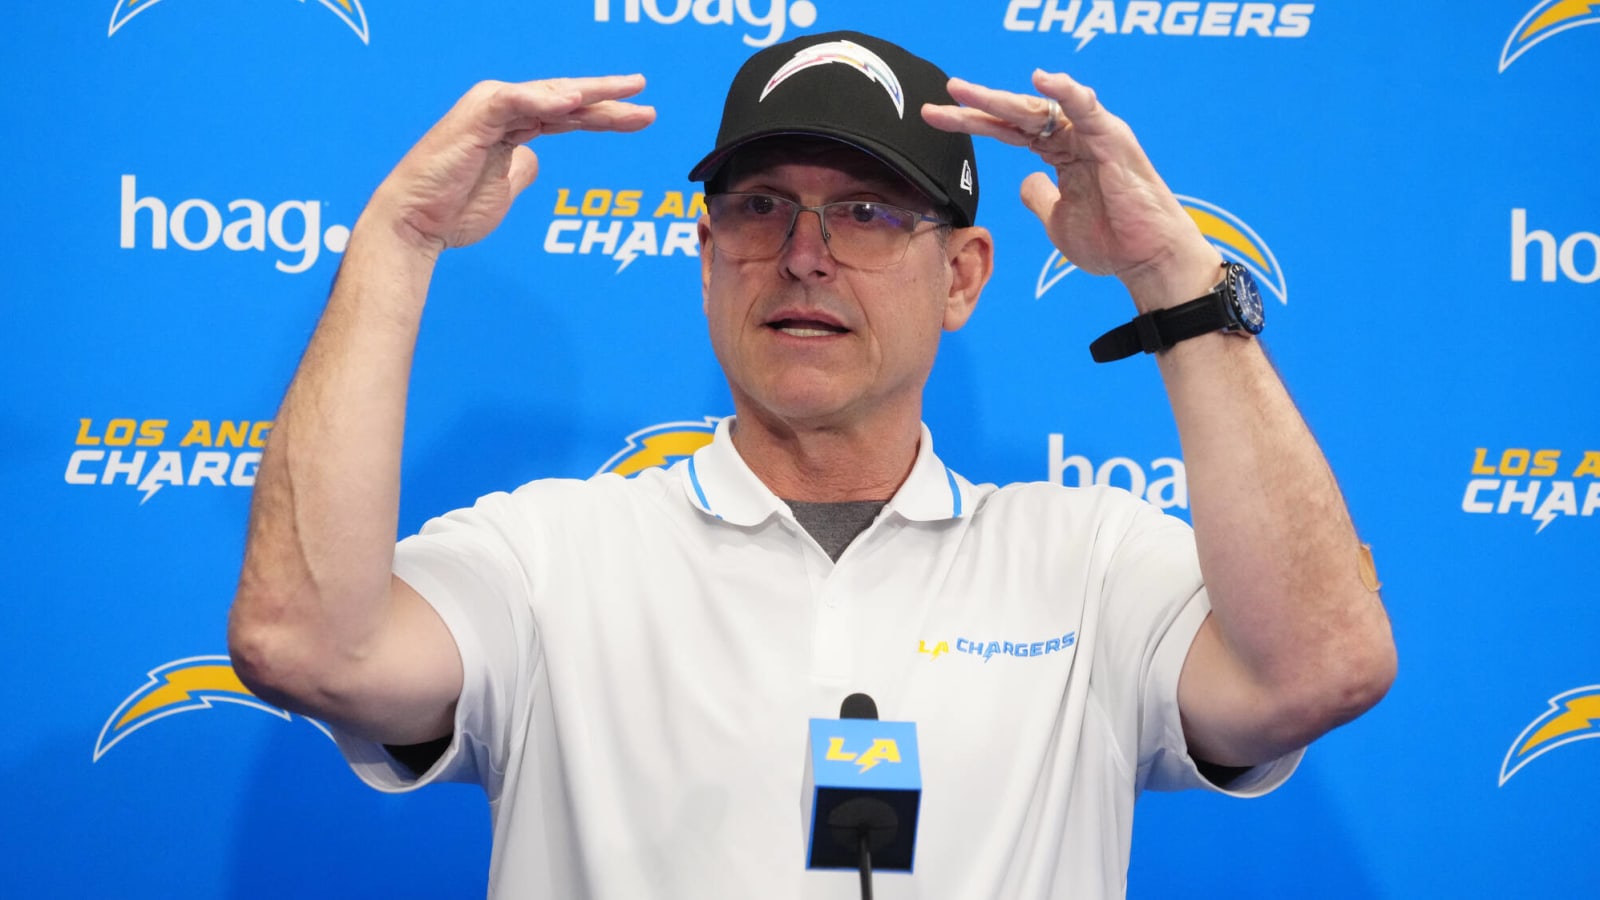 Chargers HC Jim Harbaugh delivers offseason's most locked-in quote